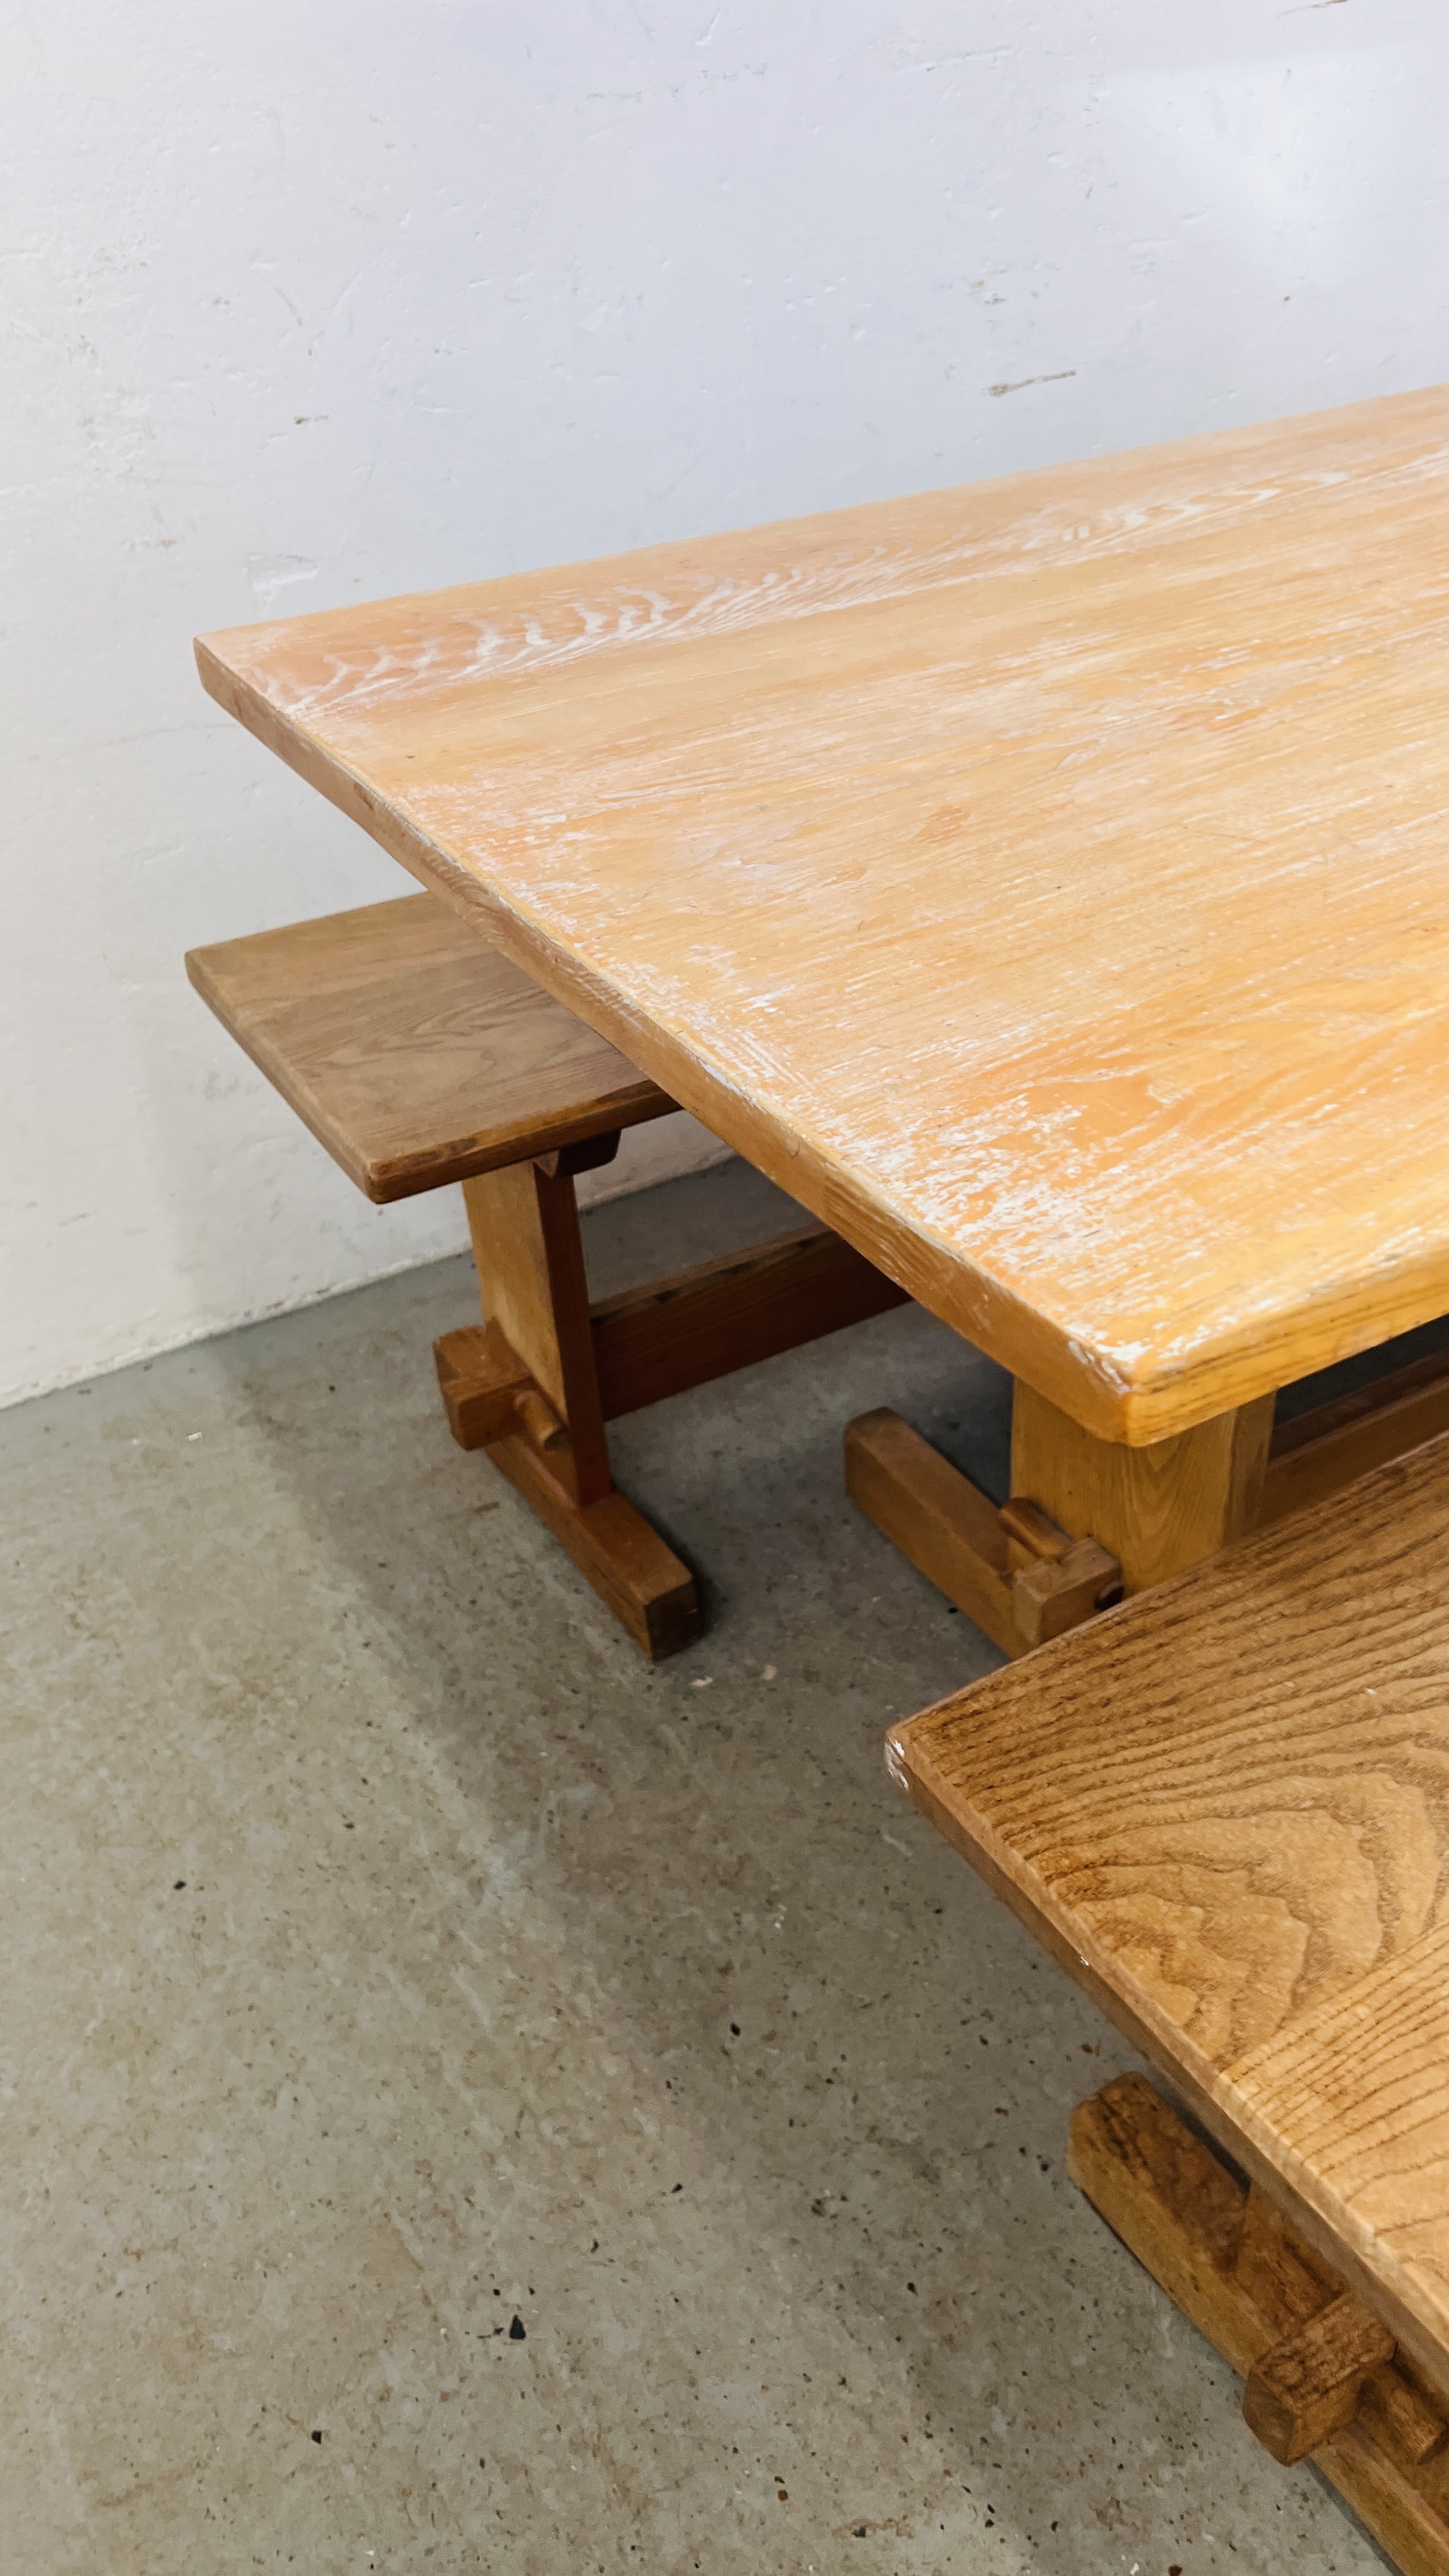 A HEAVY OAK KITCHEN TABLE L 168CM X W 79CM X H 73CM ALONG WITH A PAIR OF OAK BENCHES L 167 X W 35 X - Image 7 of 11